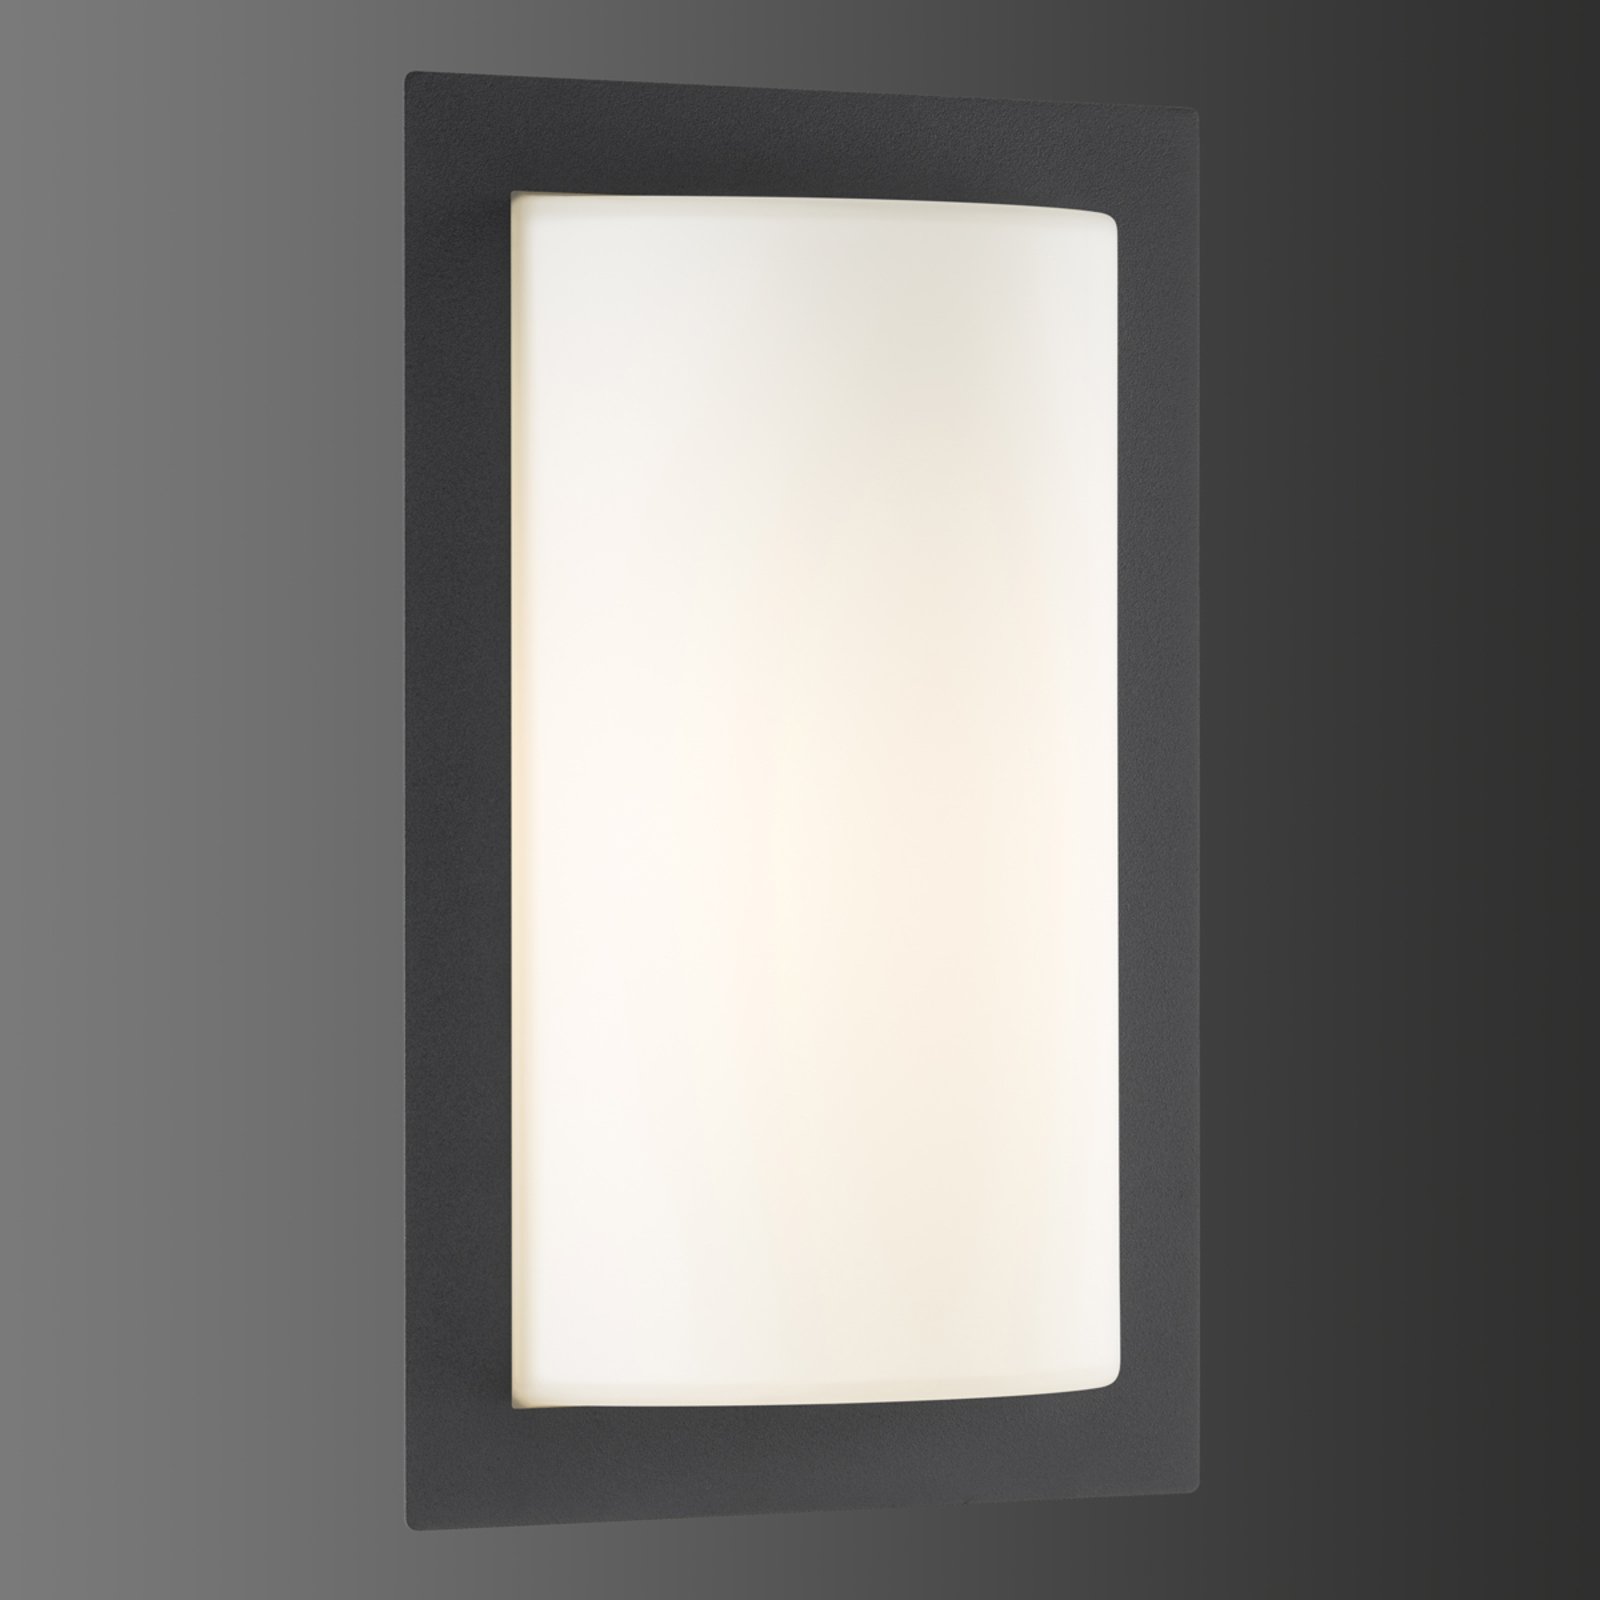 Graphite-coloured outdoor wall lamp Luis with LED light